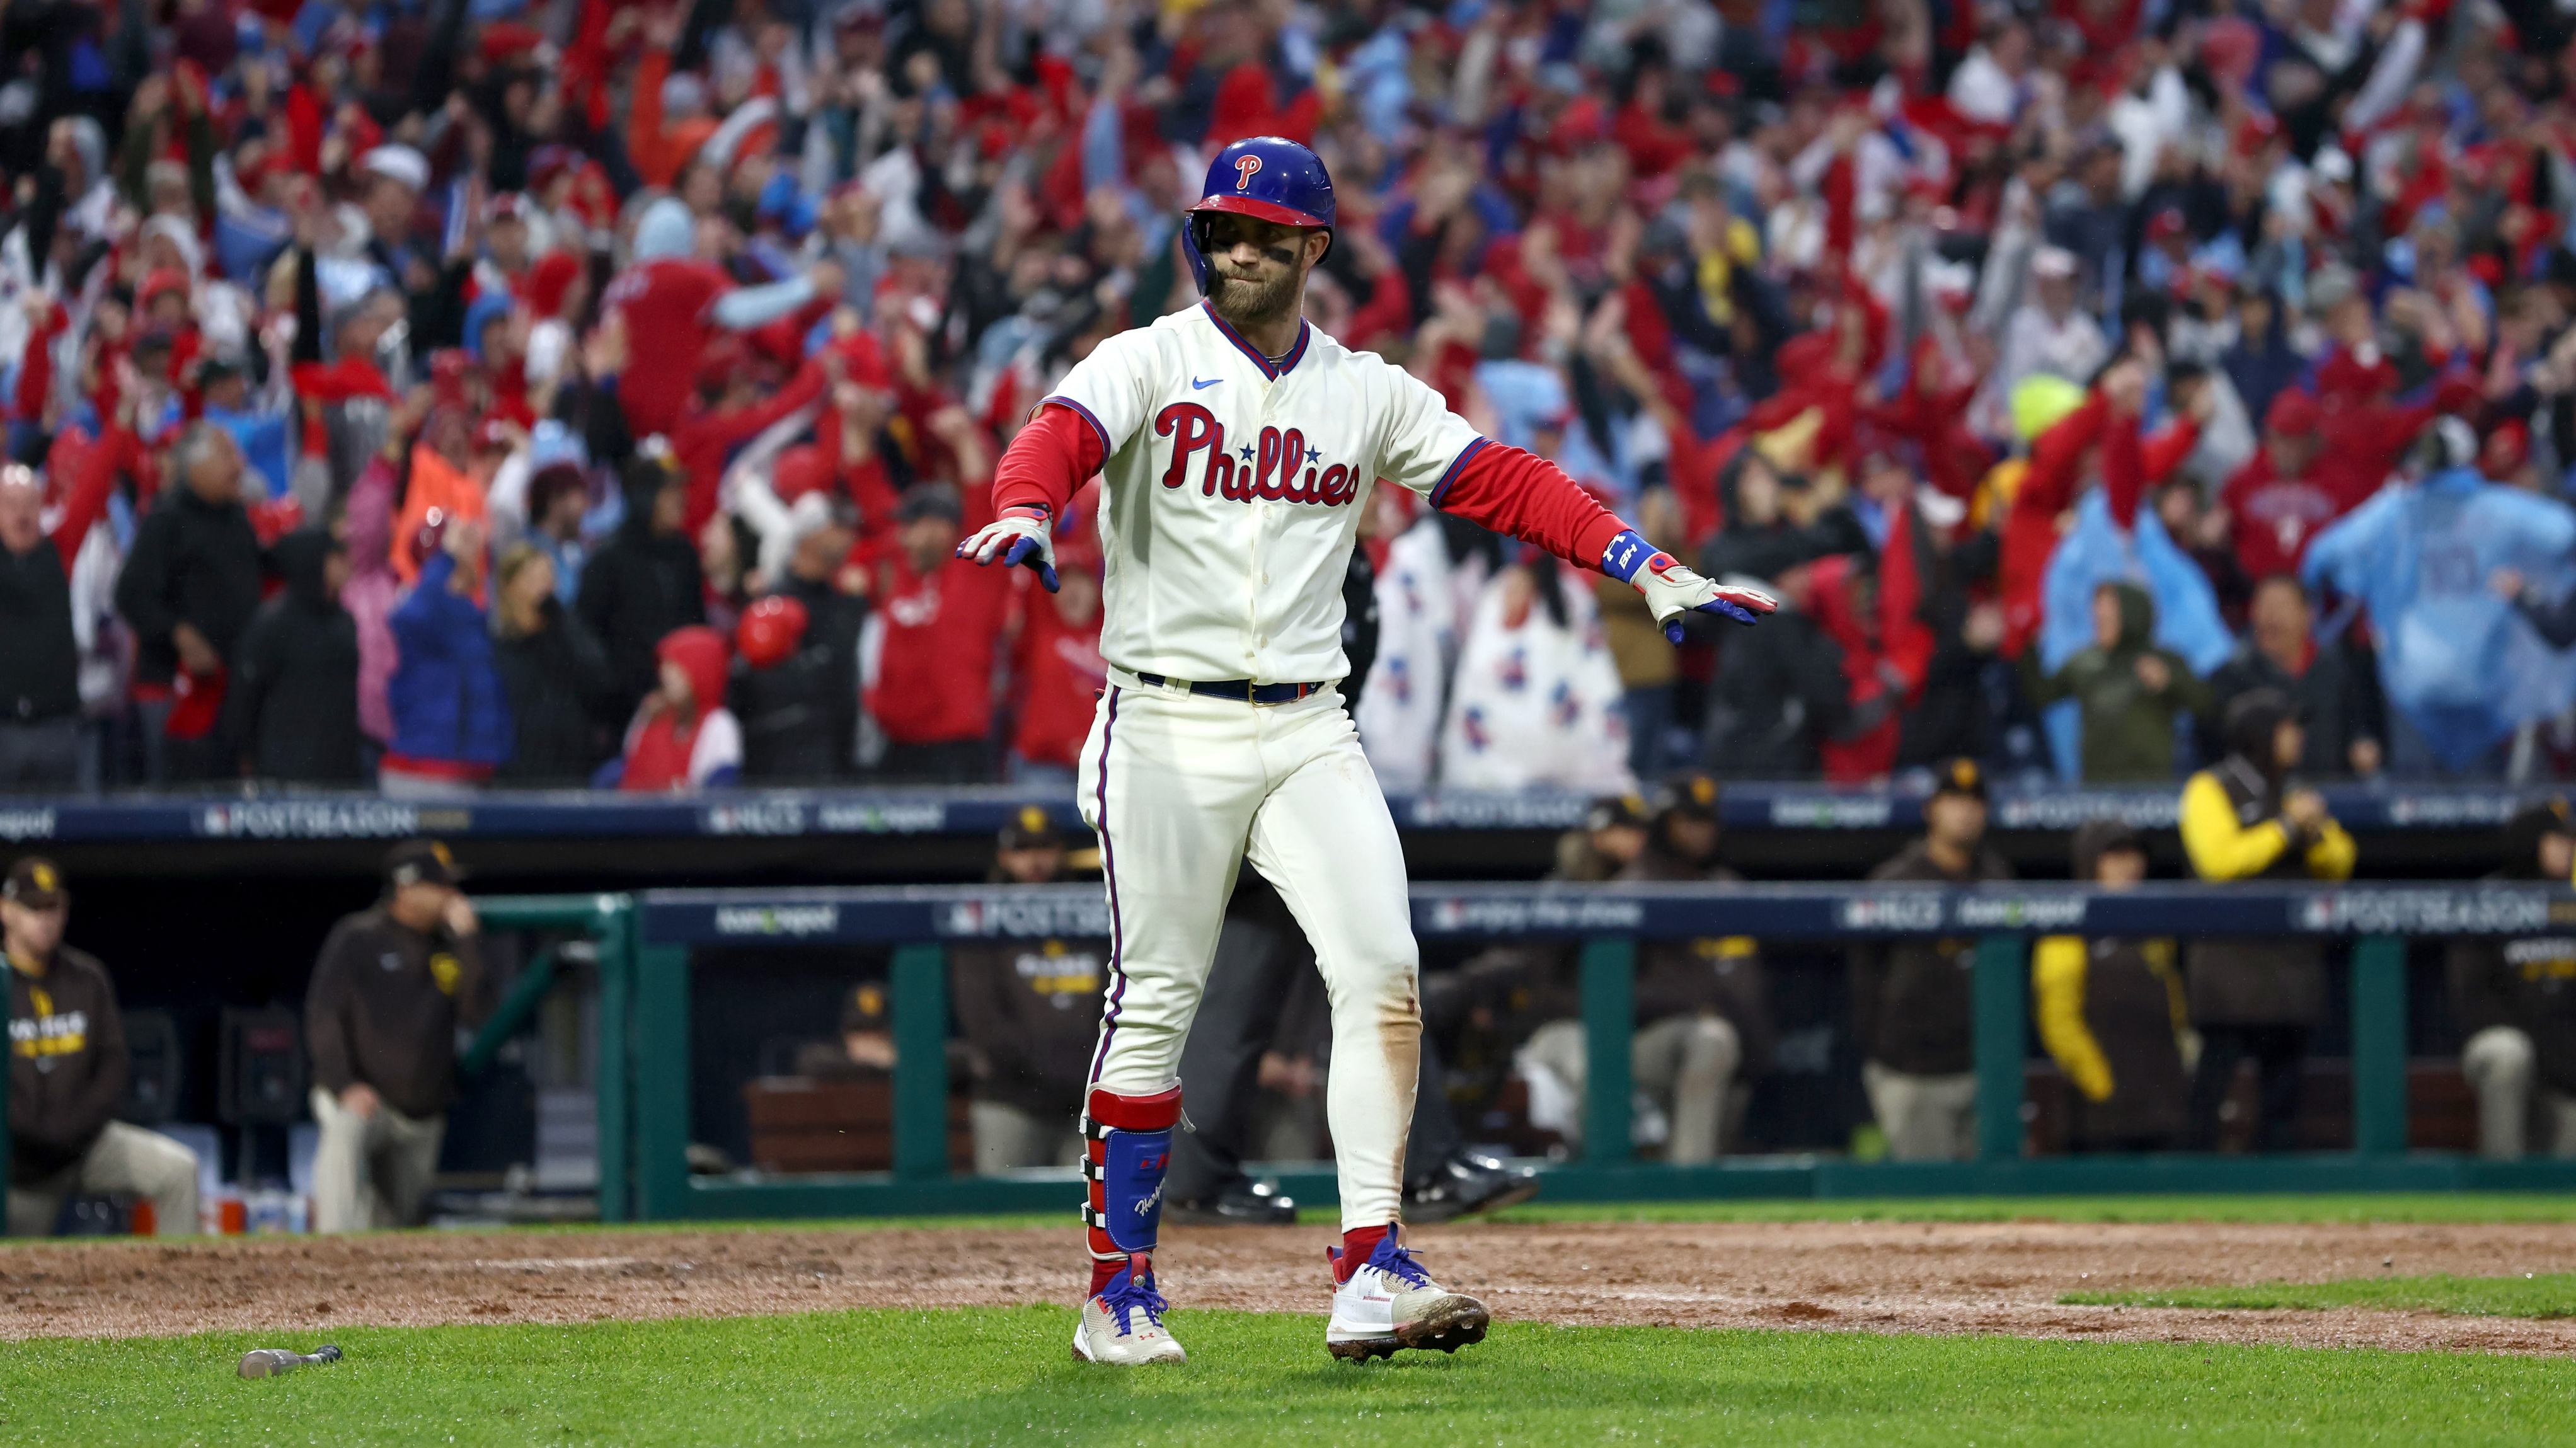 Bryce Harper with a NO-DOUBTER!! He electrifies the Philly crowd